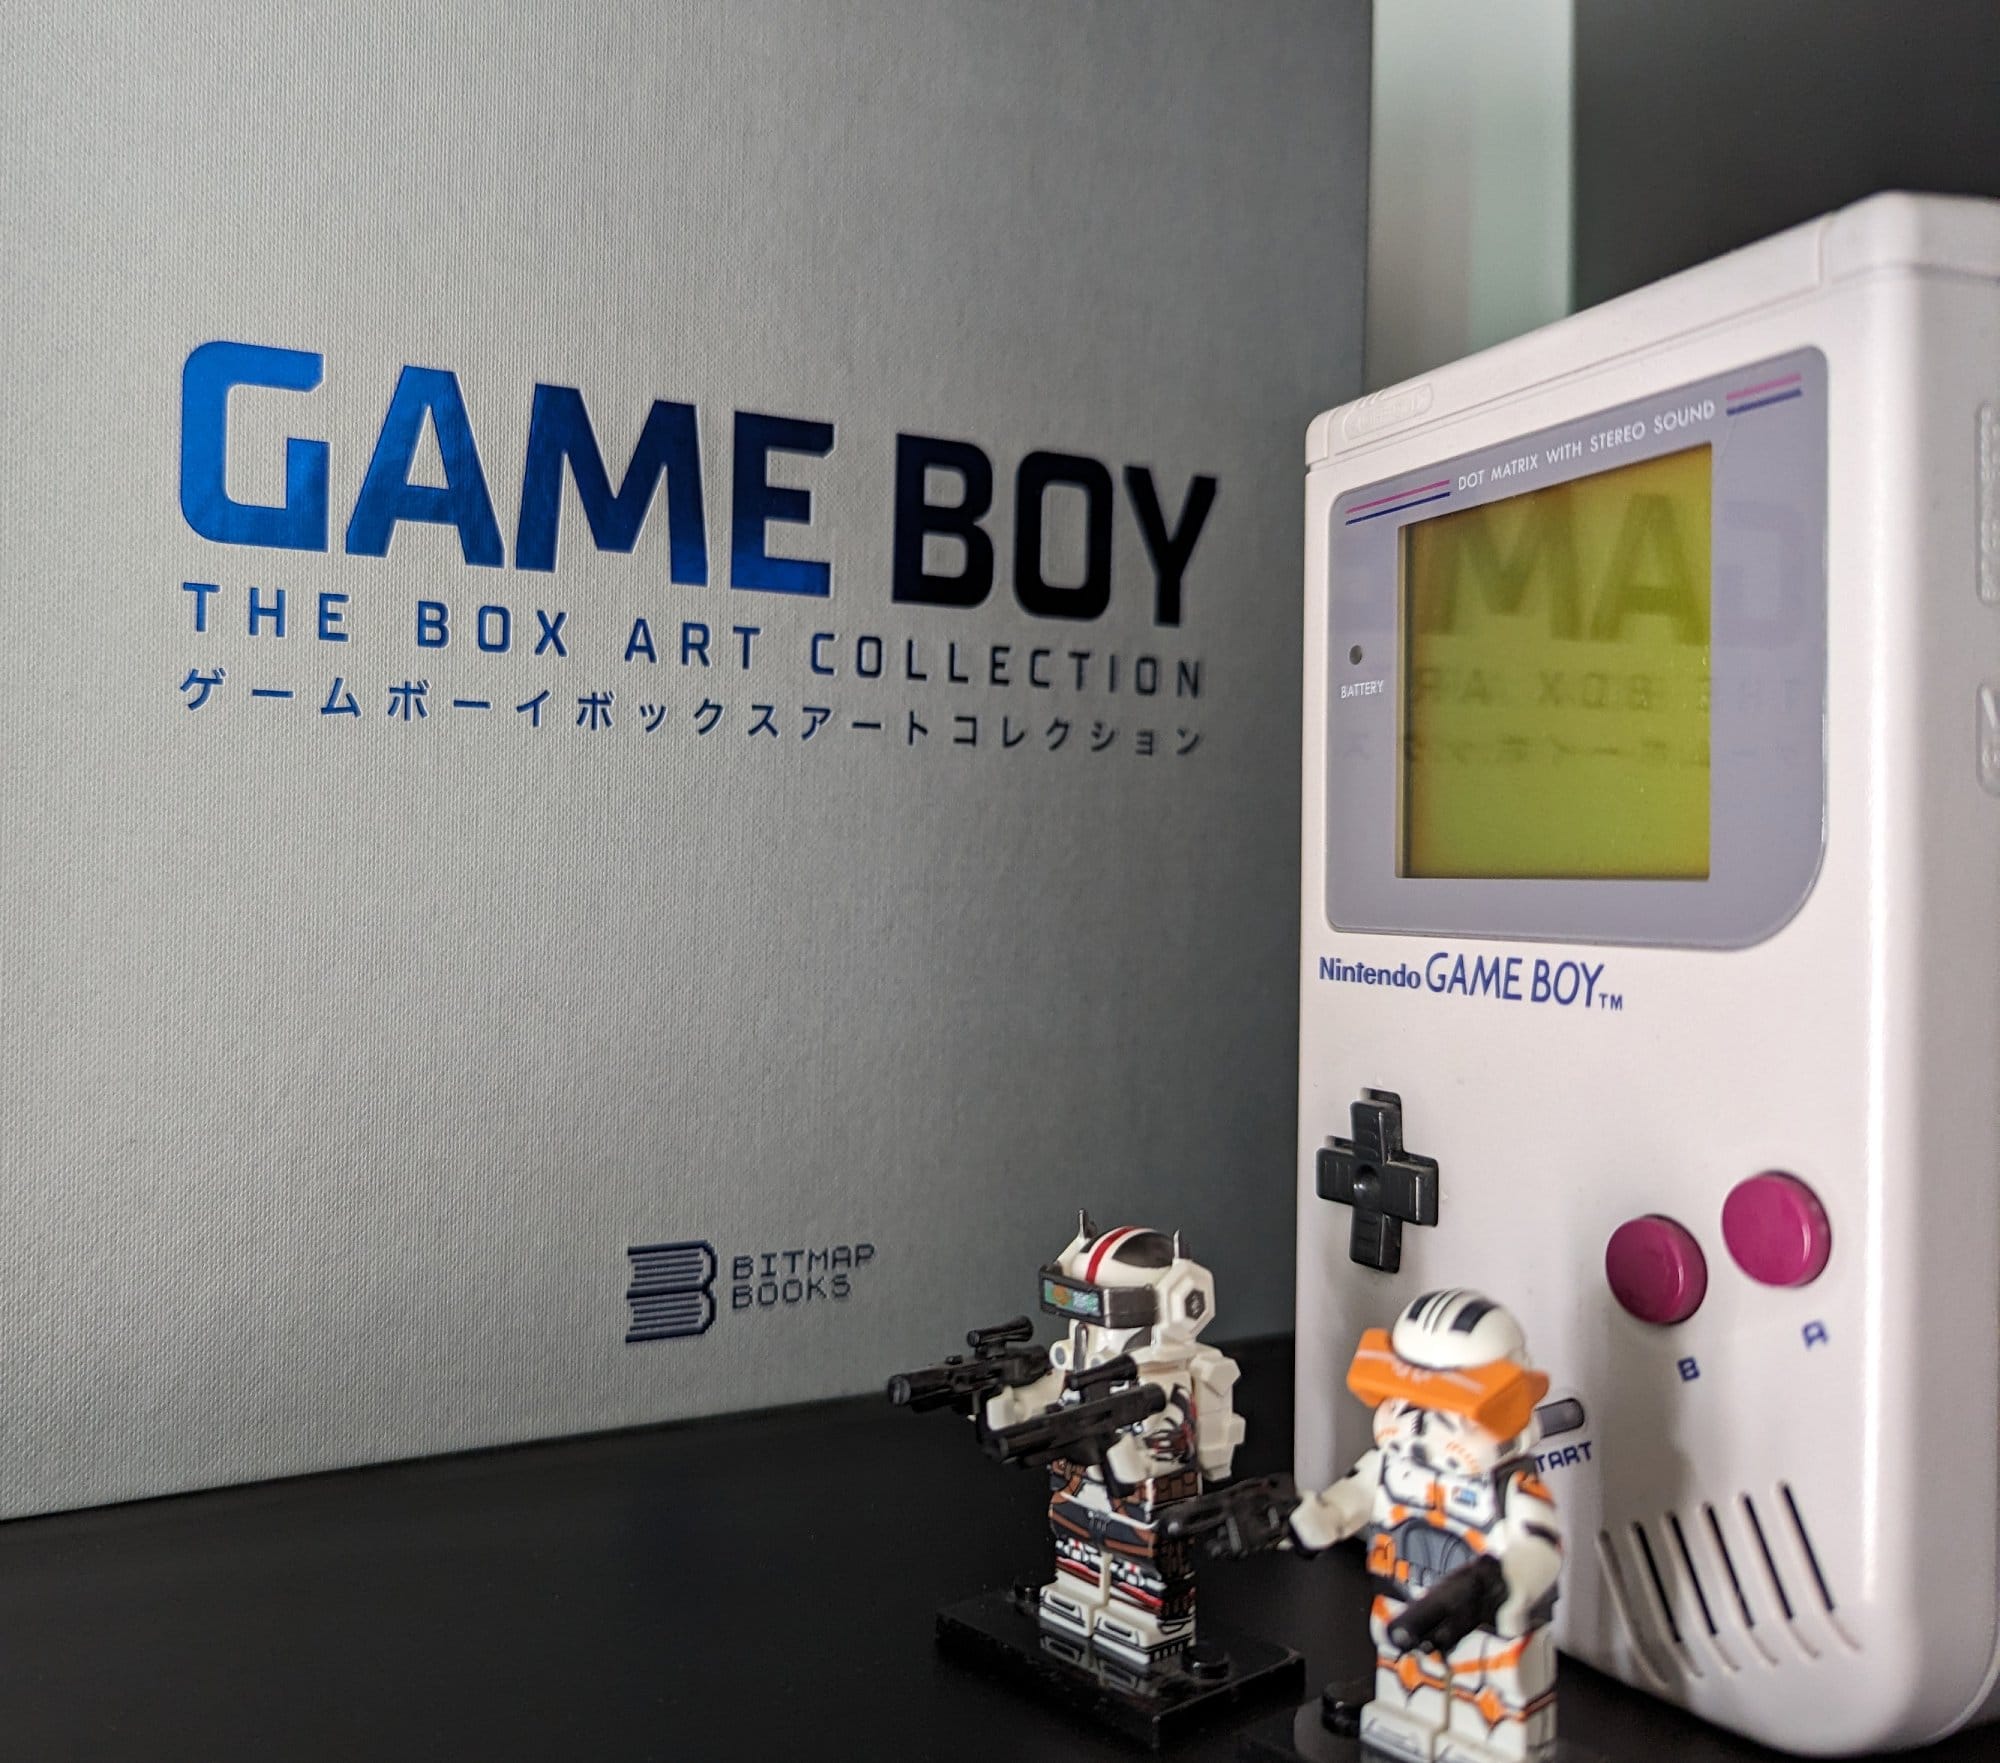 A close-up of a vintage Nintendo Game Boy displayed alongside a “Game Boy: The Box Art Collection” book, with two small action figures positioned in front